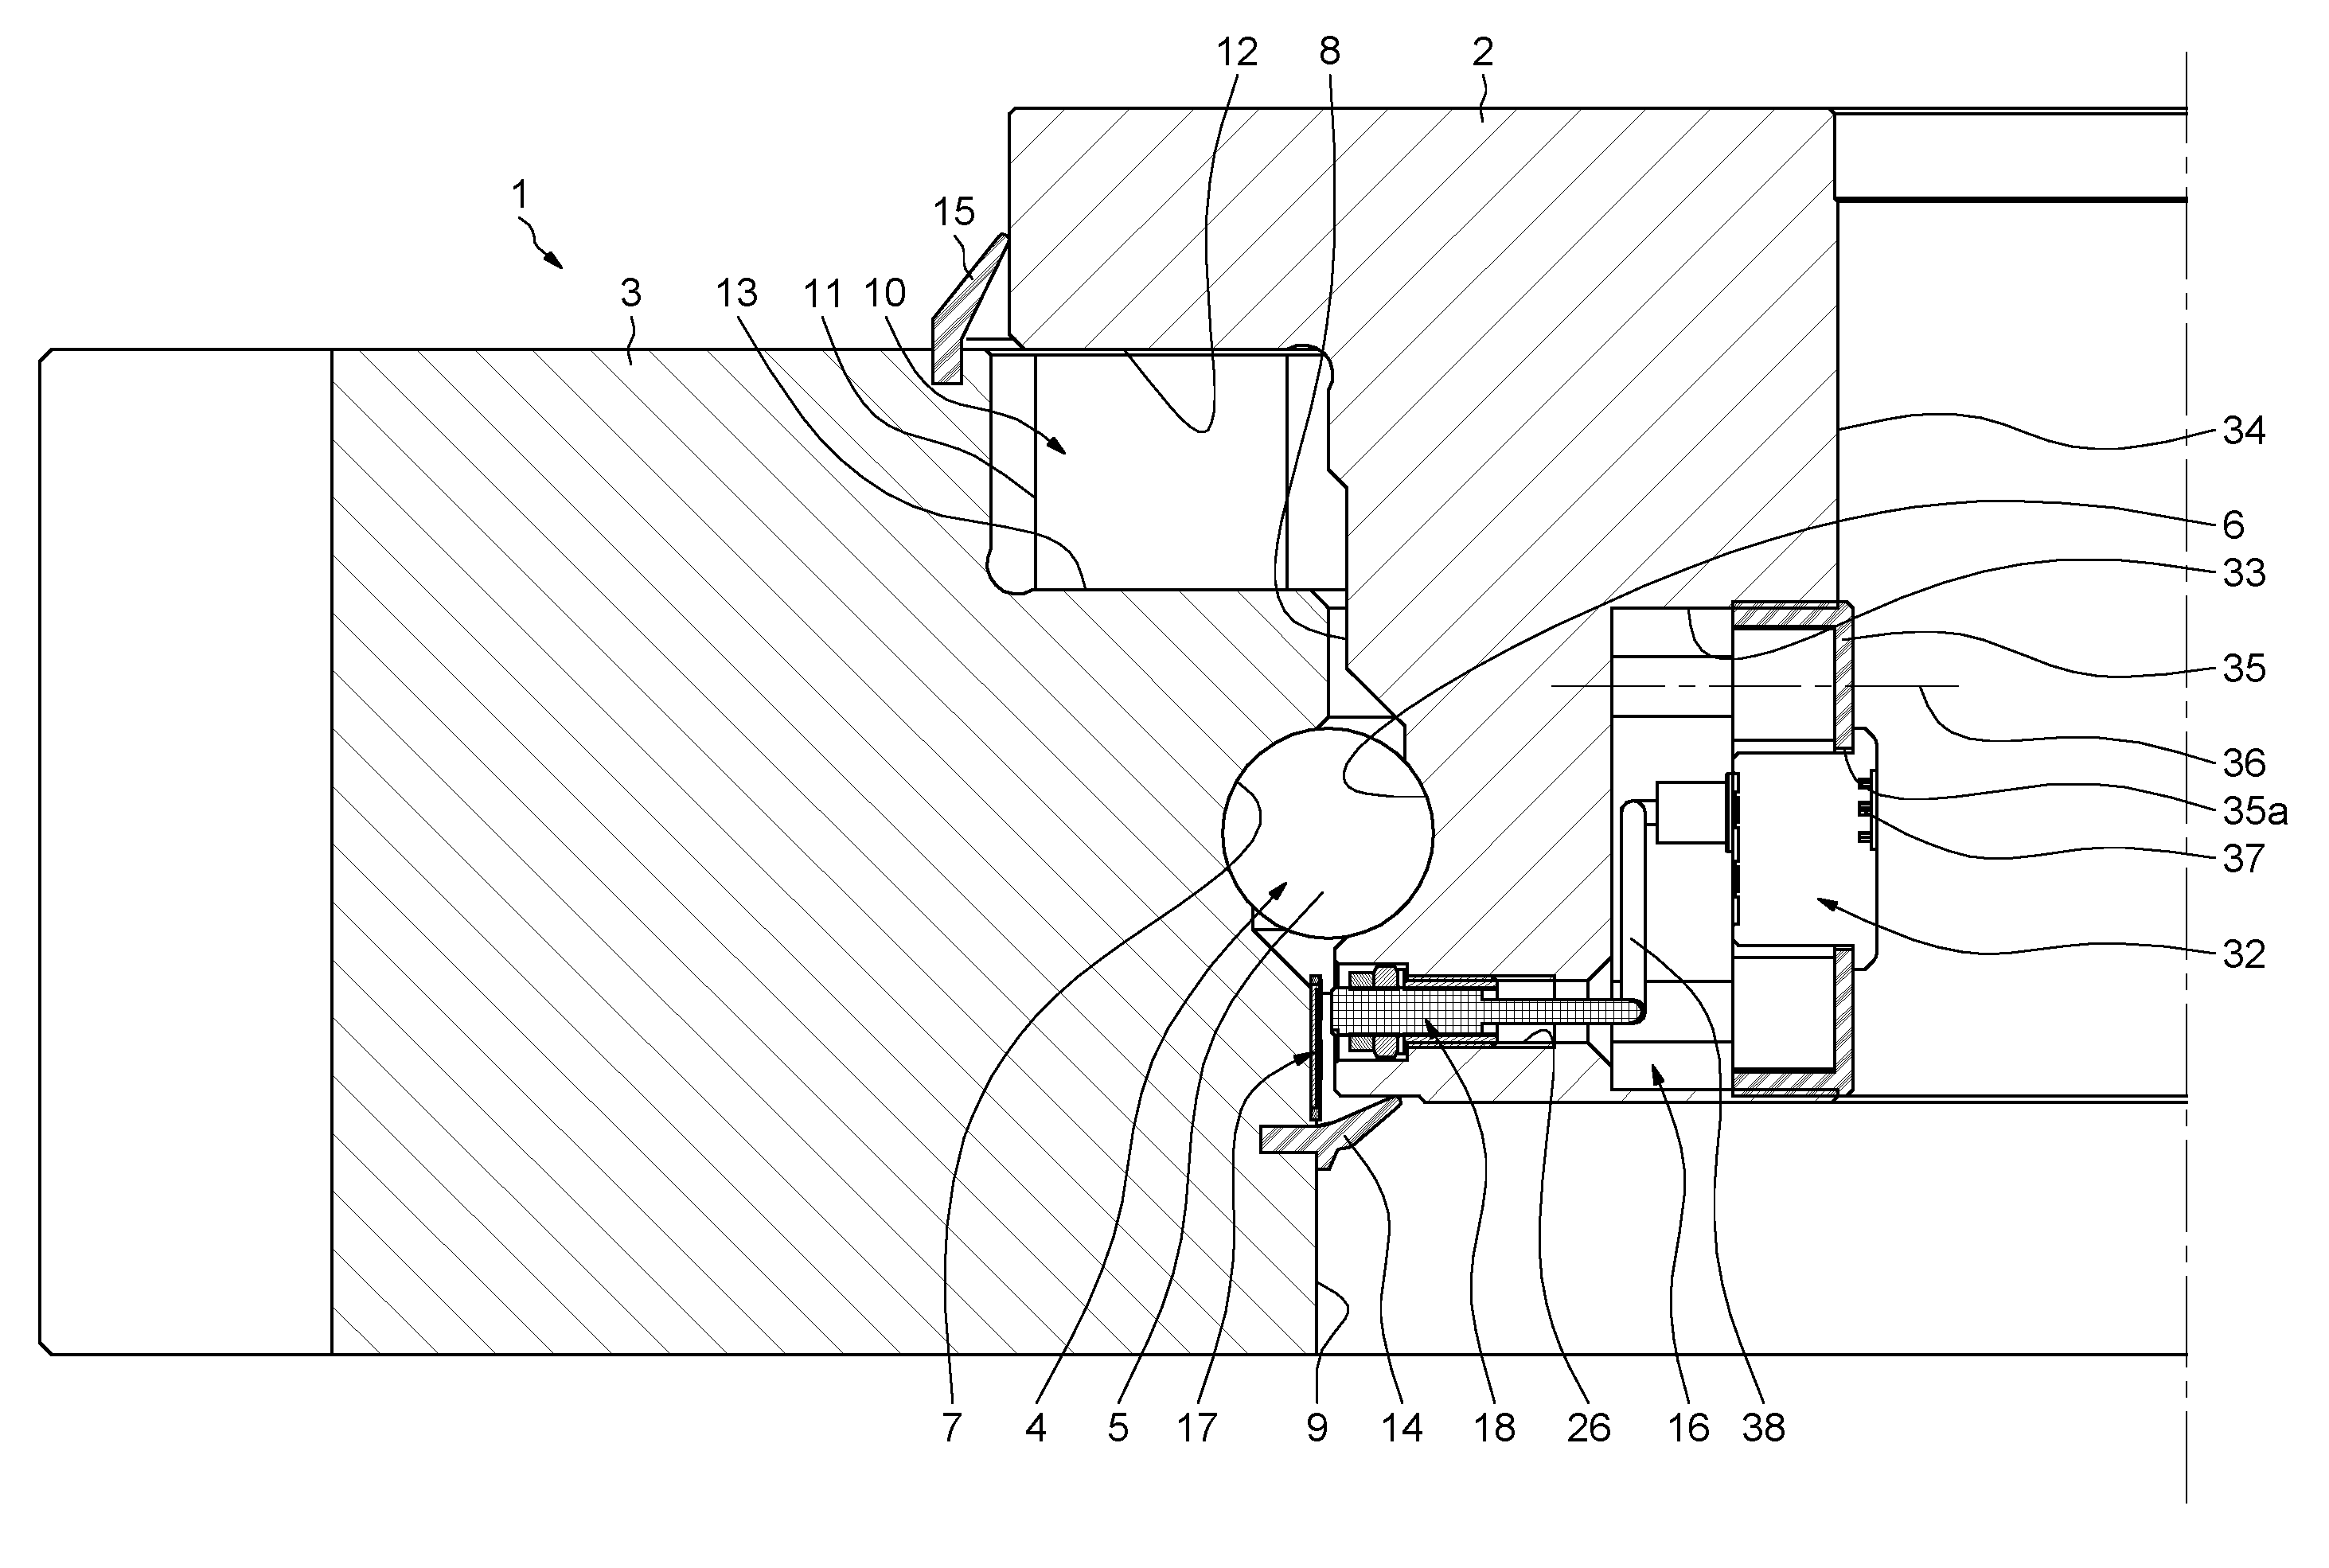 Bearing equipped with an axial displacement detecting device